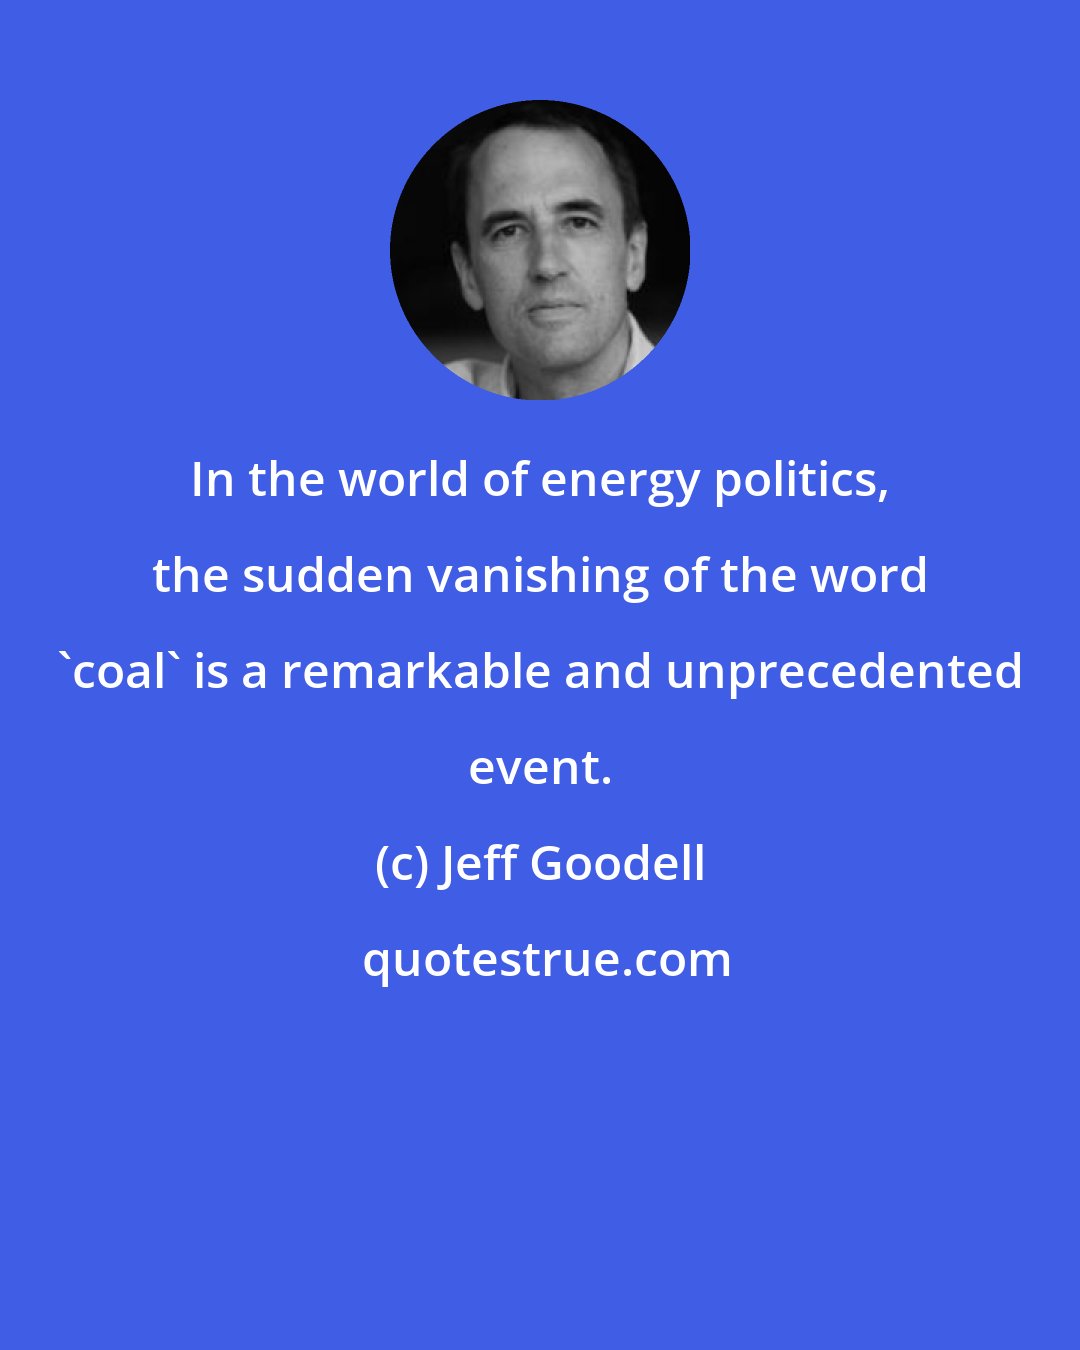 Jeff Goodell: In the world of energy politics, the sudden vanishing of the word 'coal' is a remarkable and unprecedented event.